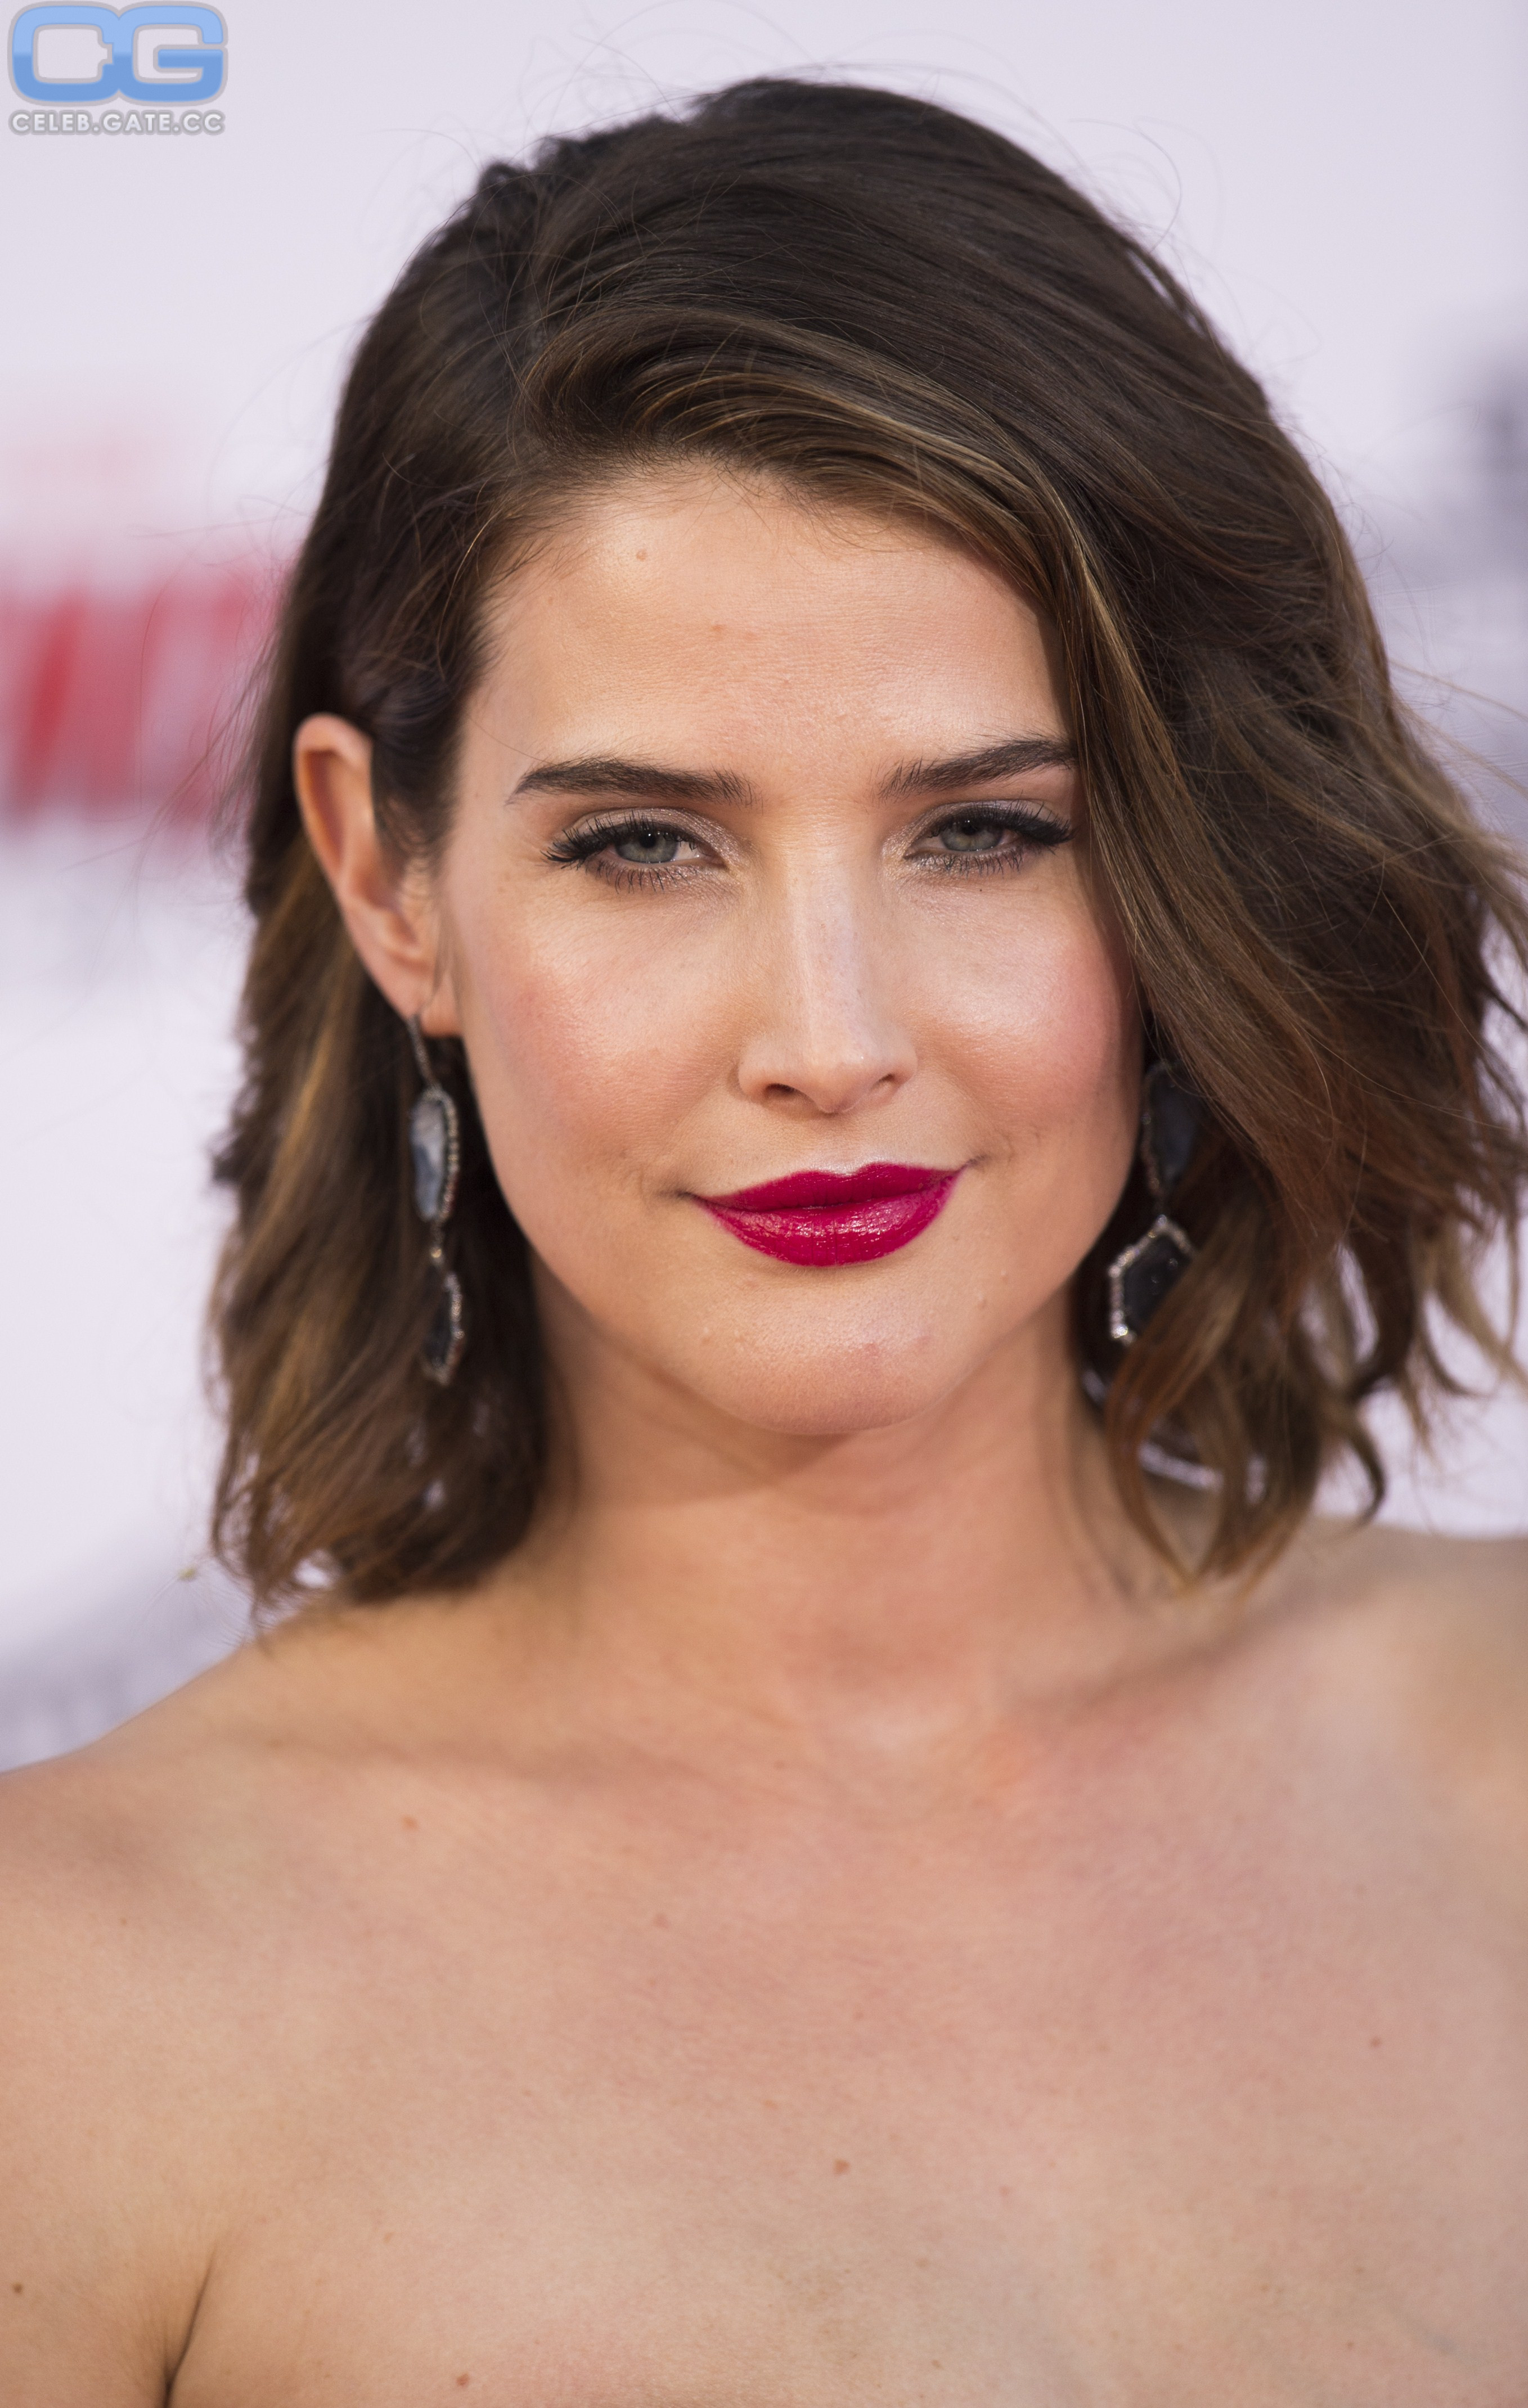 Cobie Smulders nude, pictures, photos, Playboy, naked, topless, fappening